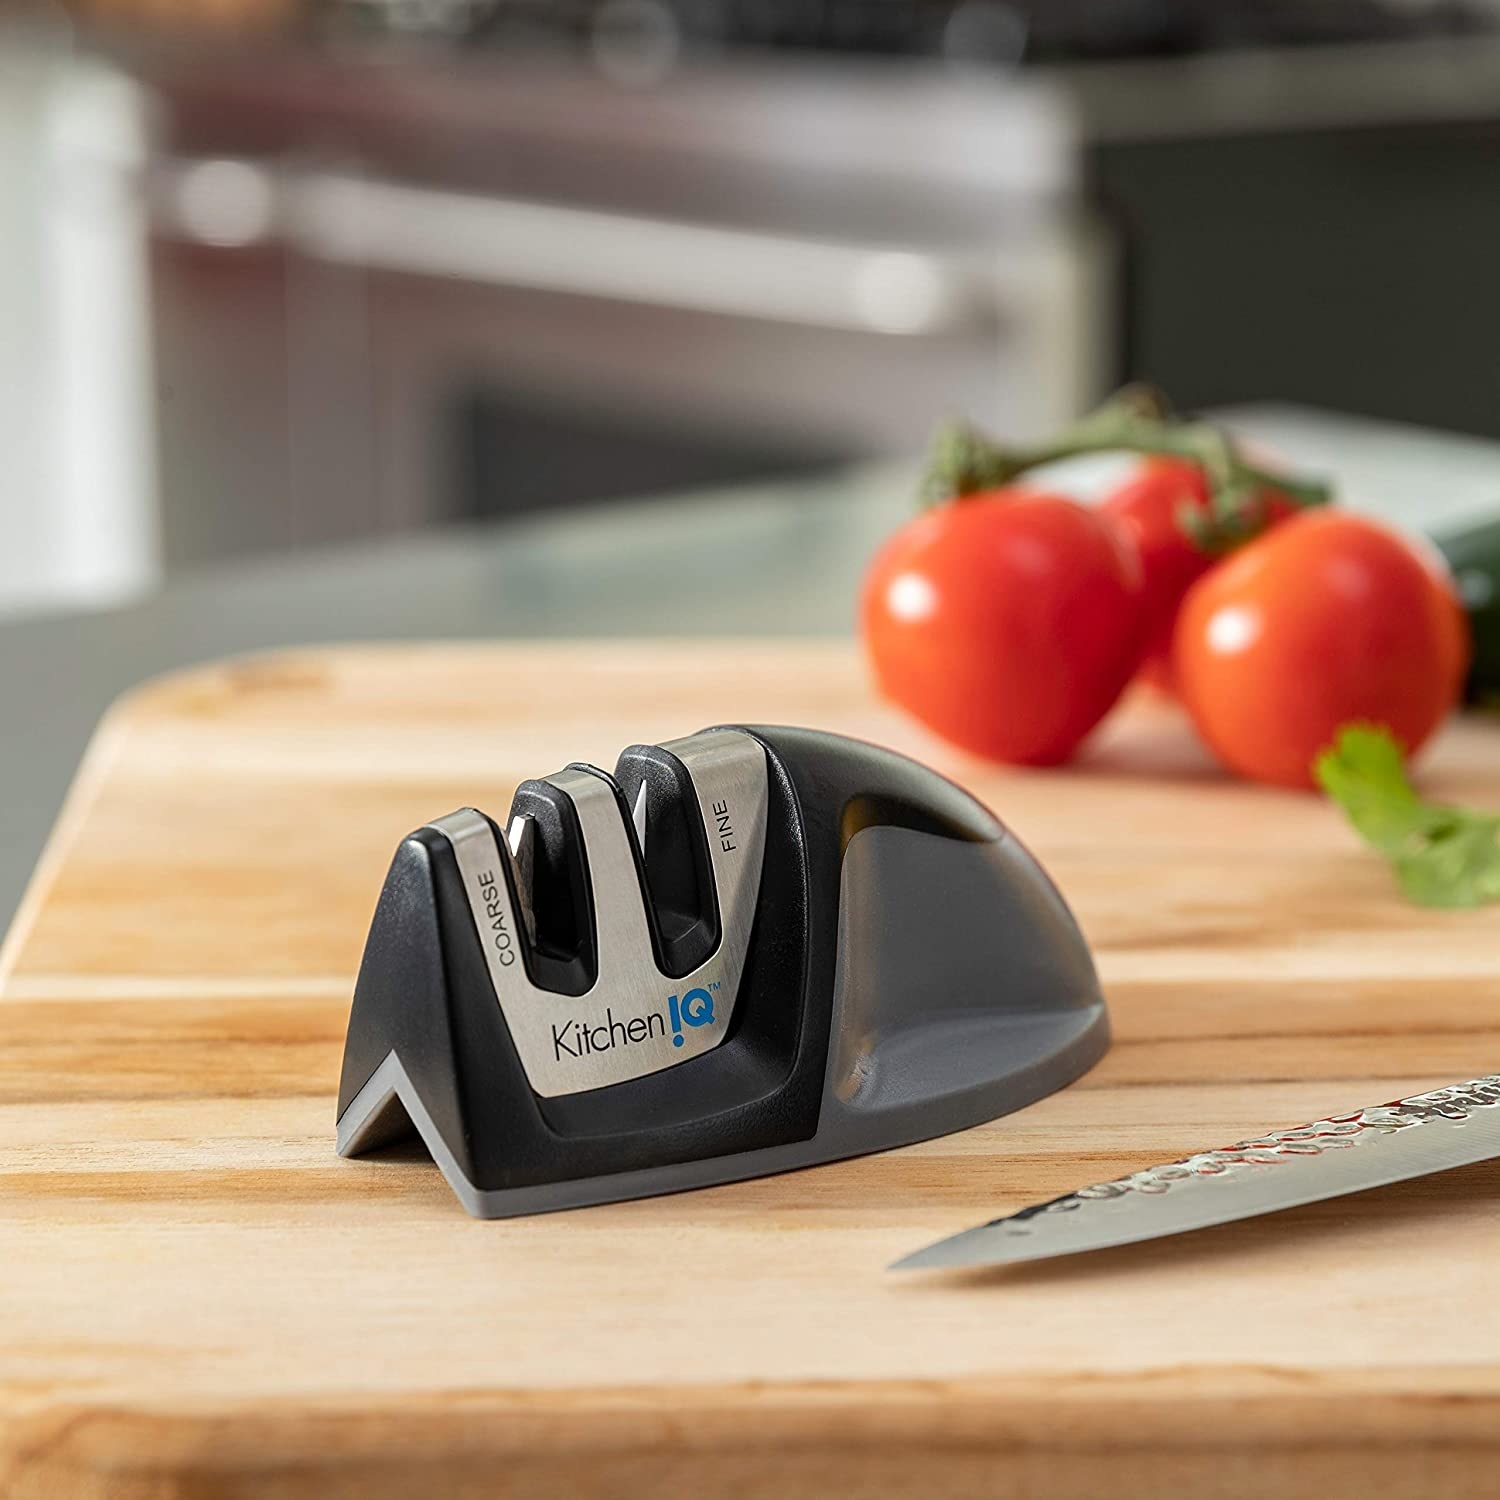 stock photo showing the knife sharpener resting on a cutting board next to a knife